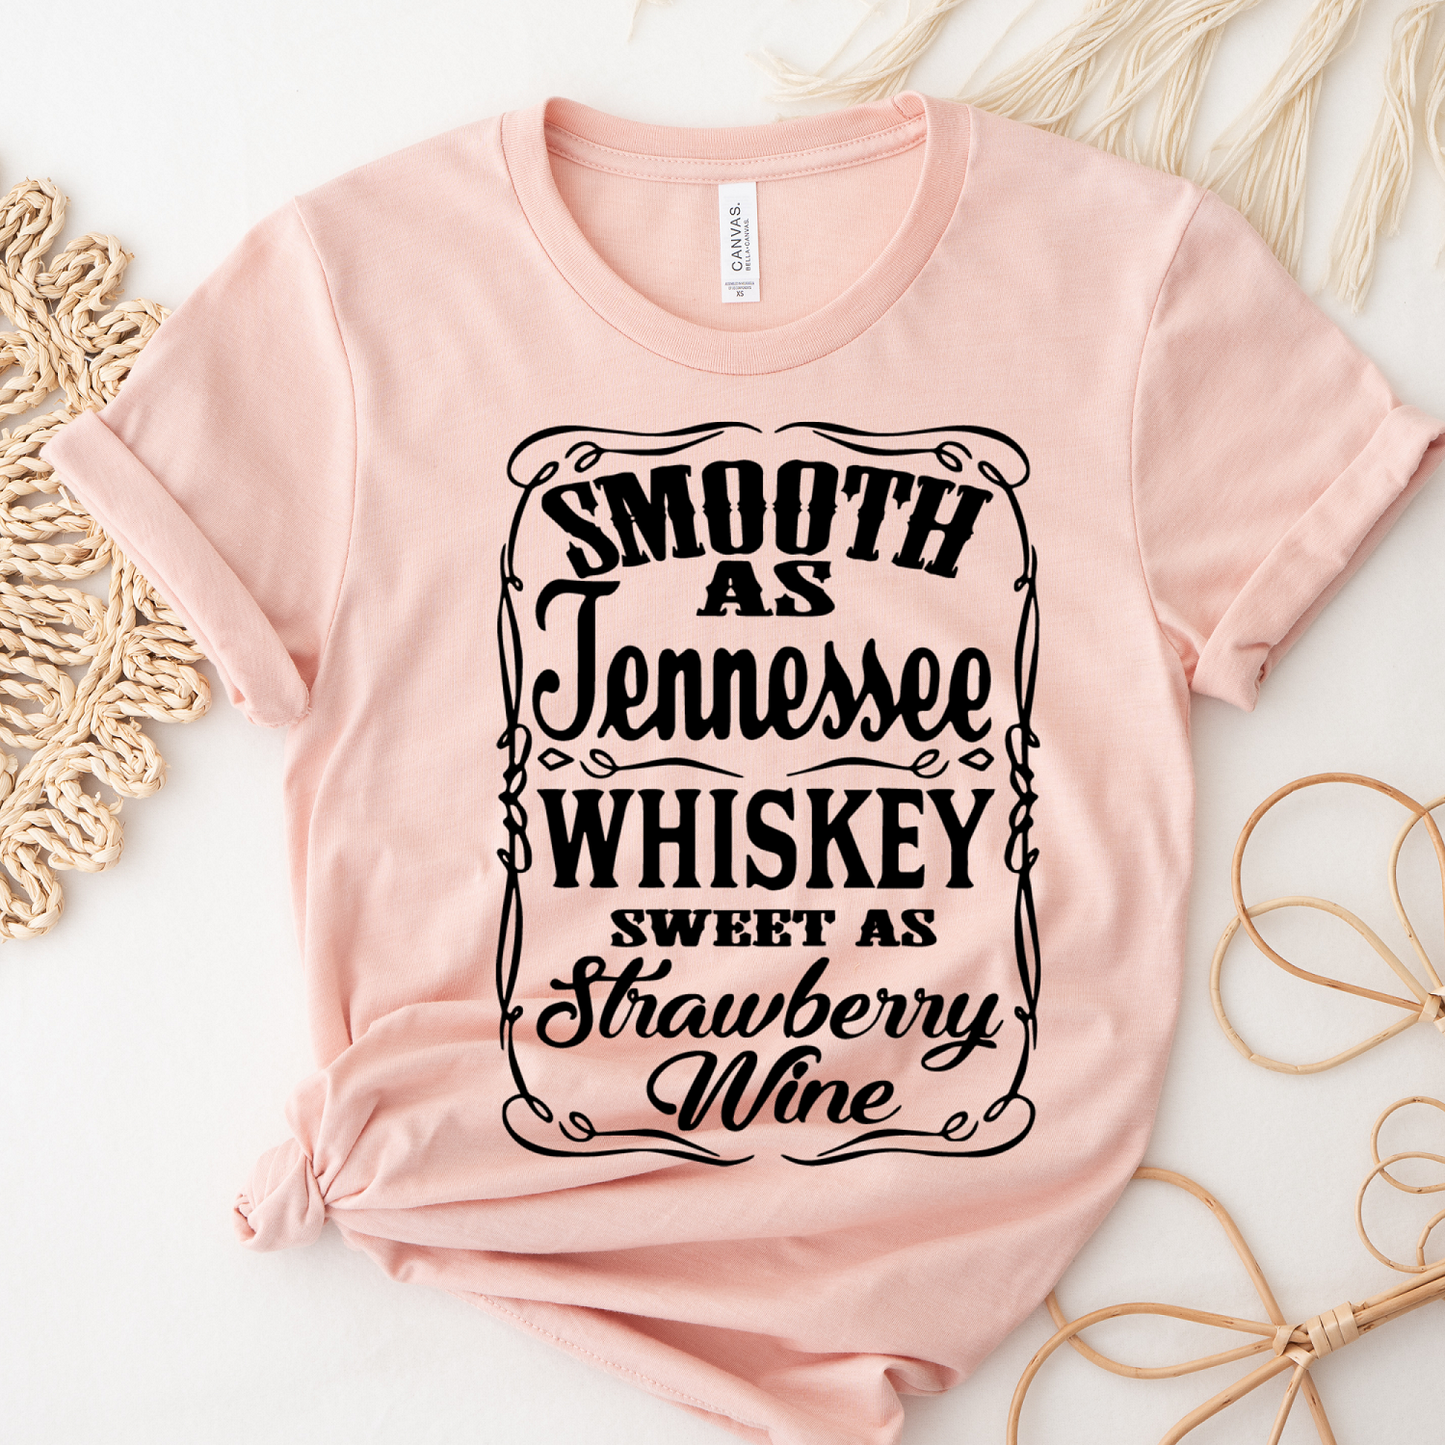 Smooth As Tennessee Whiskey Peach Graphic Tee